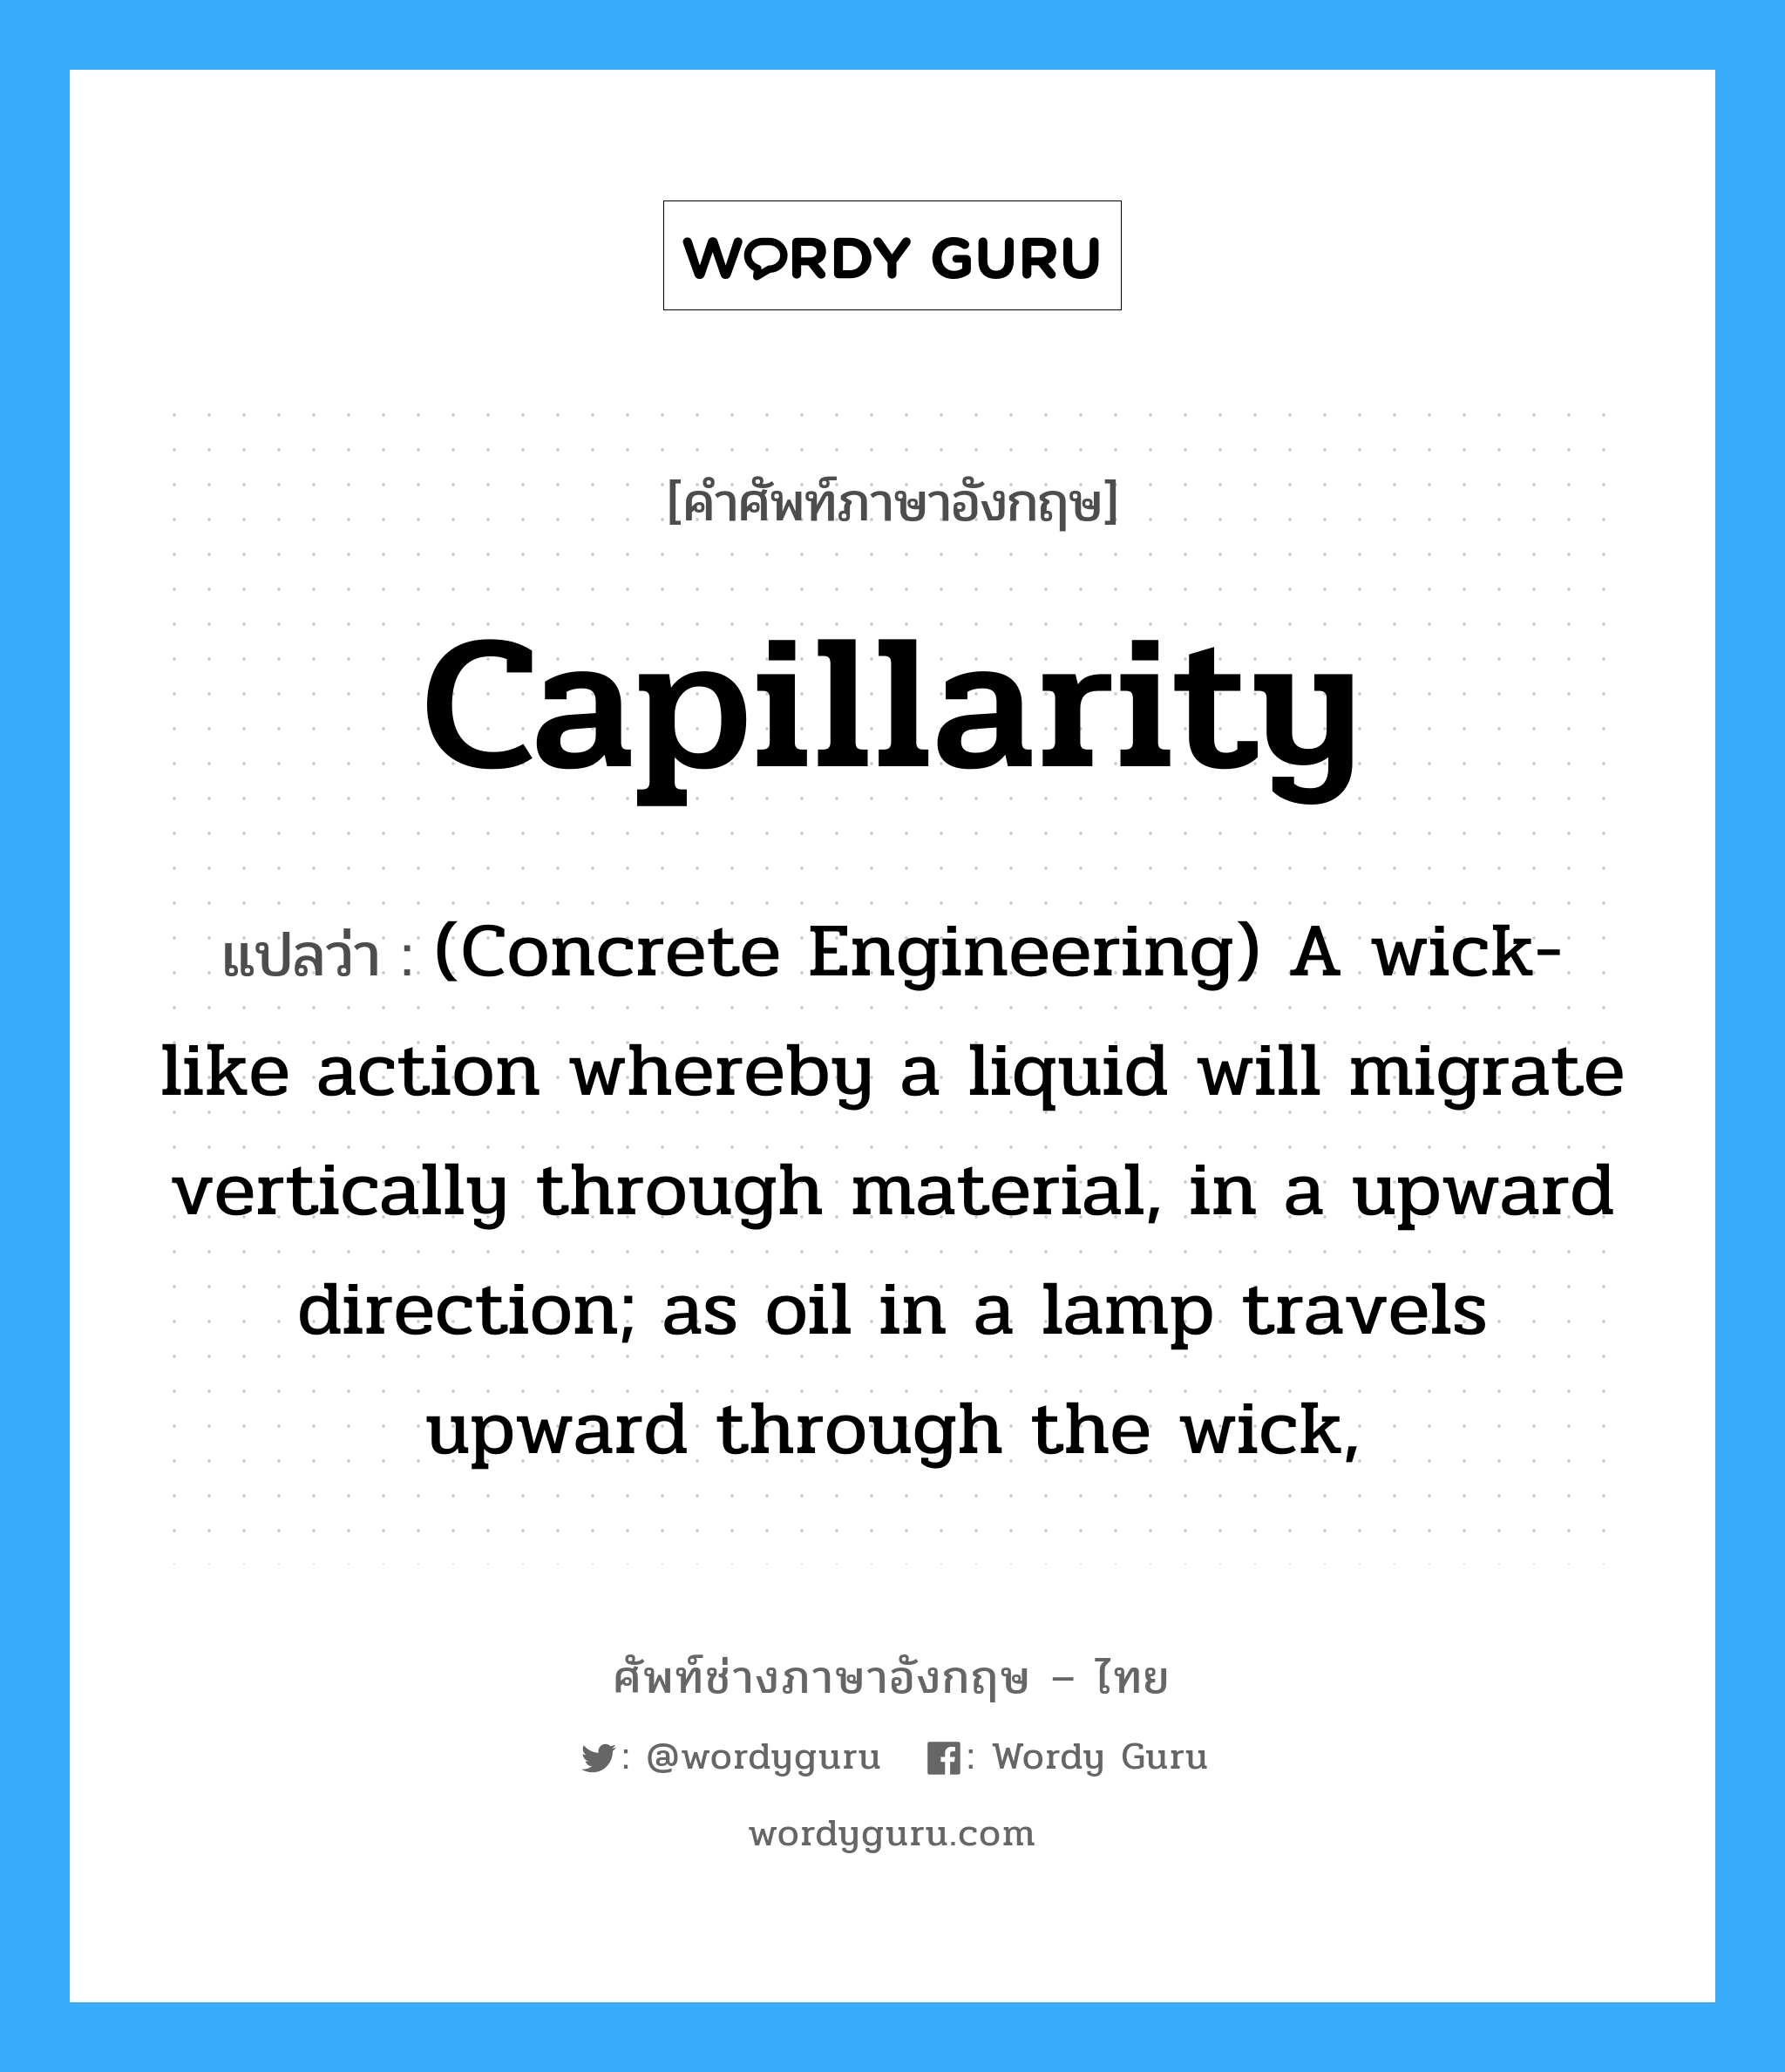 Capillarity แปลว่า?, คำศัพท์ช่างภาษาอังกฤษ - ไทย Capillarity คำศัพท์ภาษาอังกฤษ Capillarity แปลว่า (Concrete Engineering) A wick-like action whereby a liquid will migrate vertically through material, in a upward direction; as oil in a lamp travels upward through the wick,